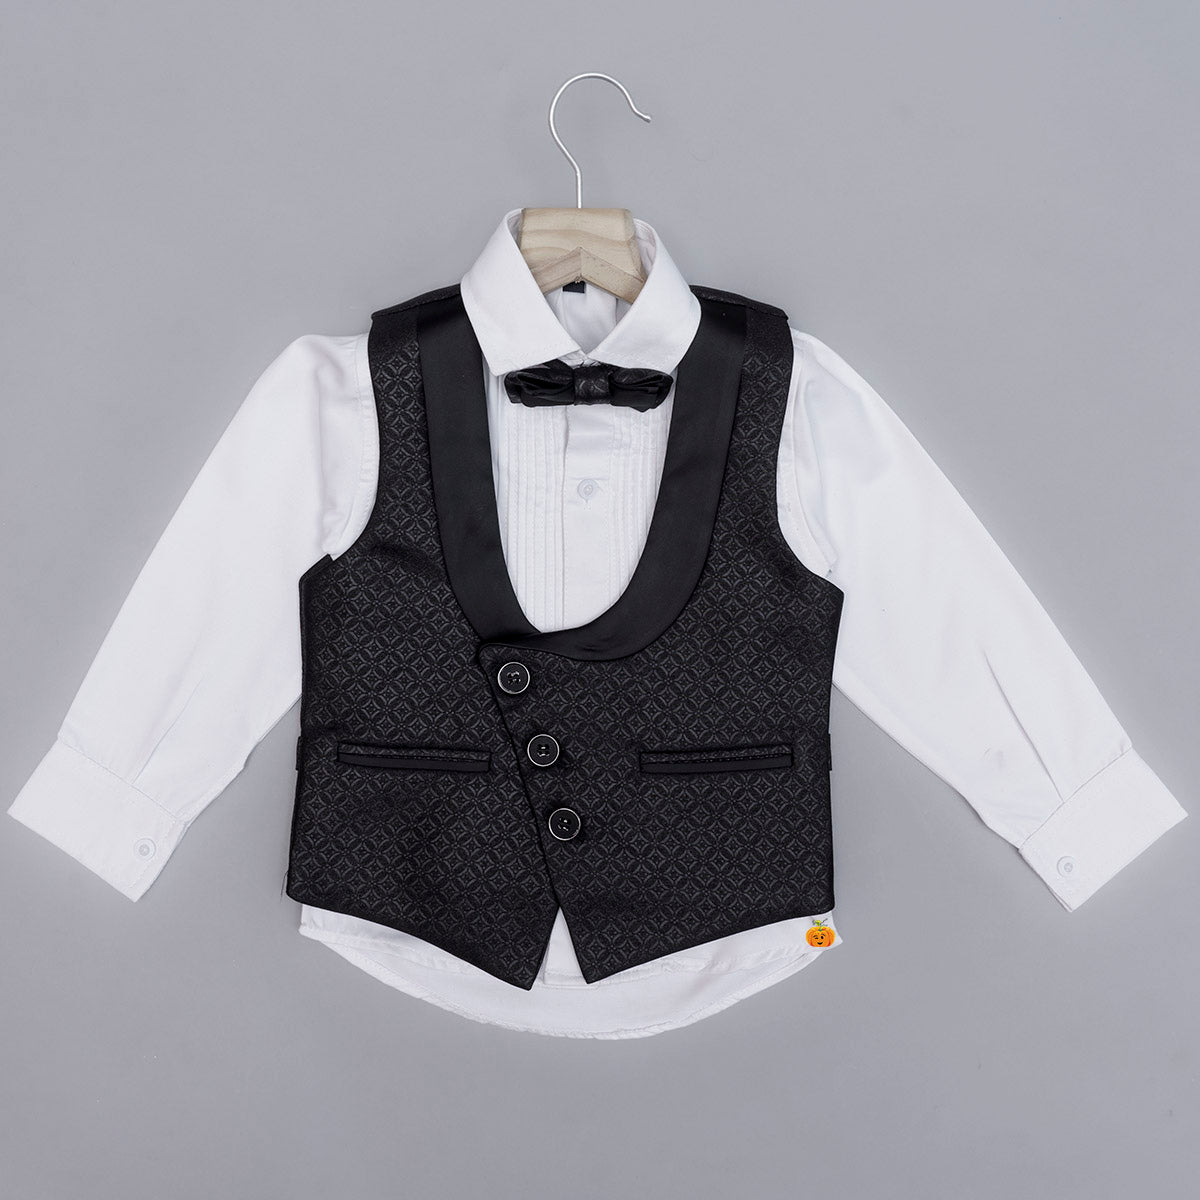 Buy YuanLu 4 Piece Boys' Formal Suit Set with Black Vest Pants White Dress  Shirt and Tie Size 2T at Amazon.in